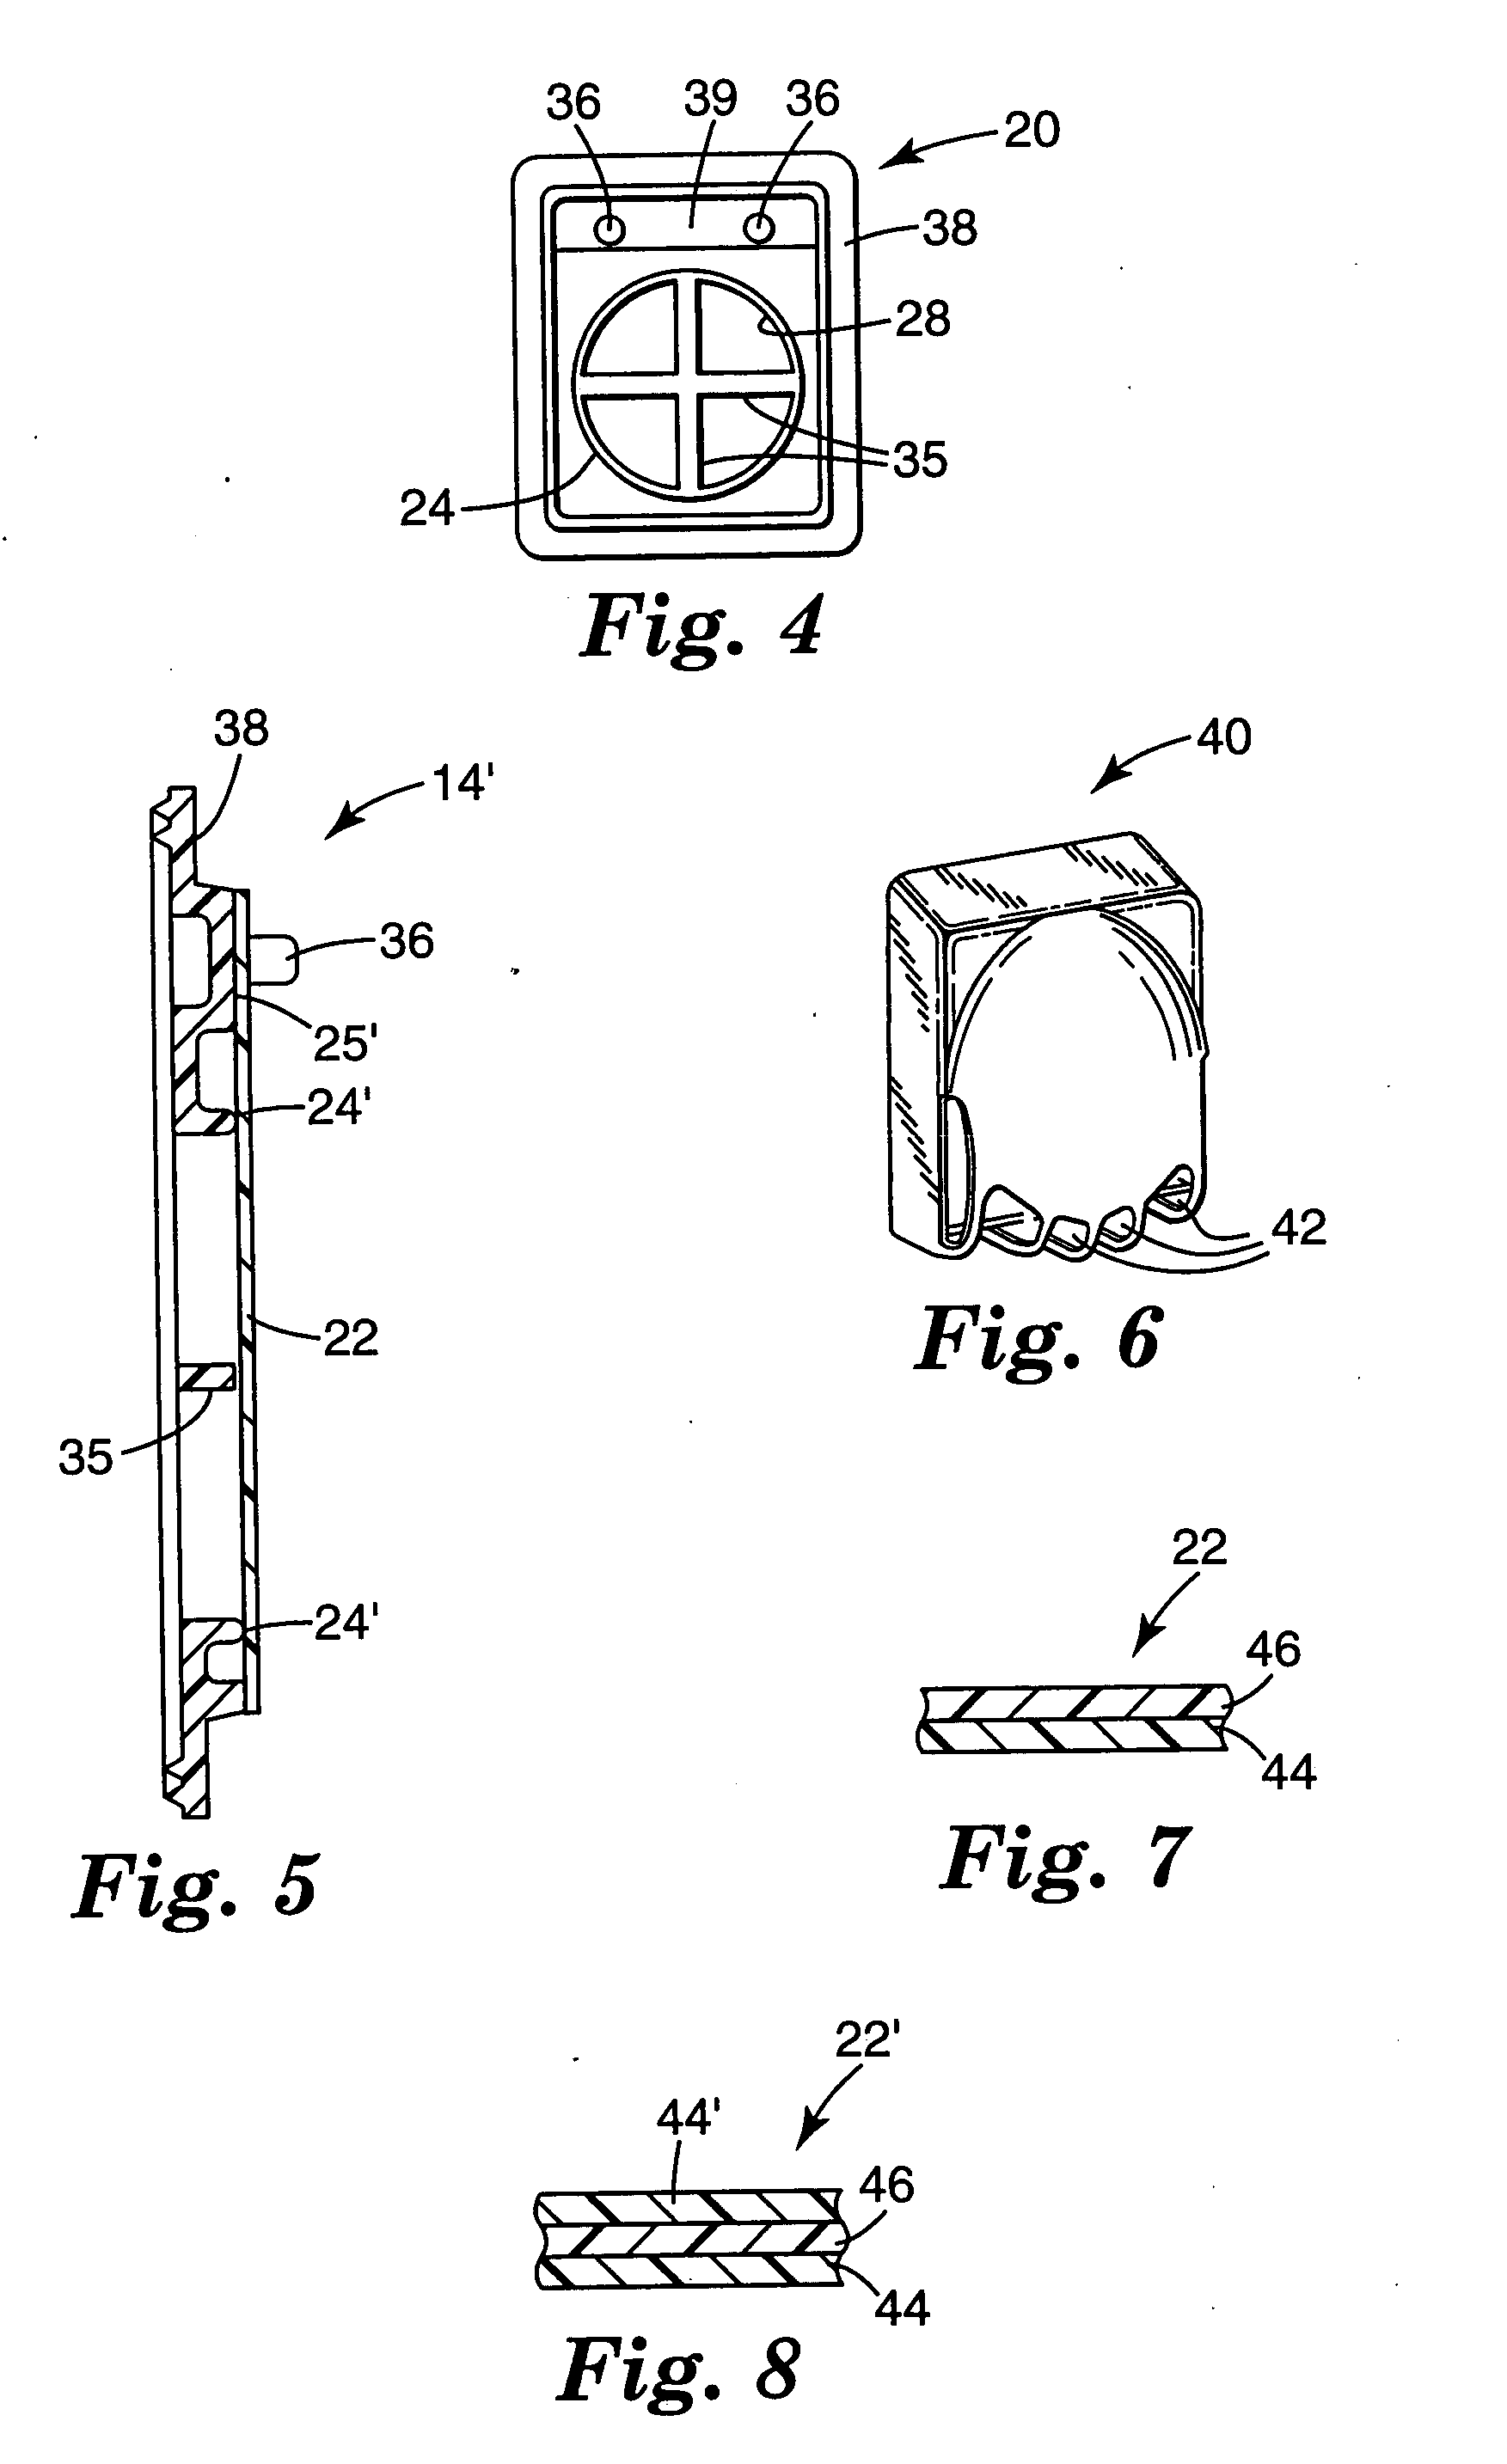 Filtering face mask that uses an exhalation valve that has a multi-layered flexible flap